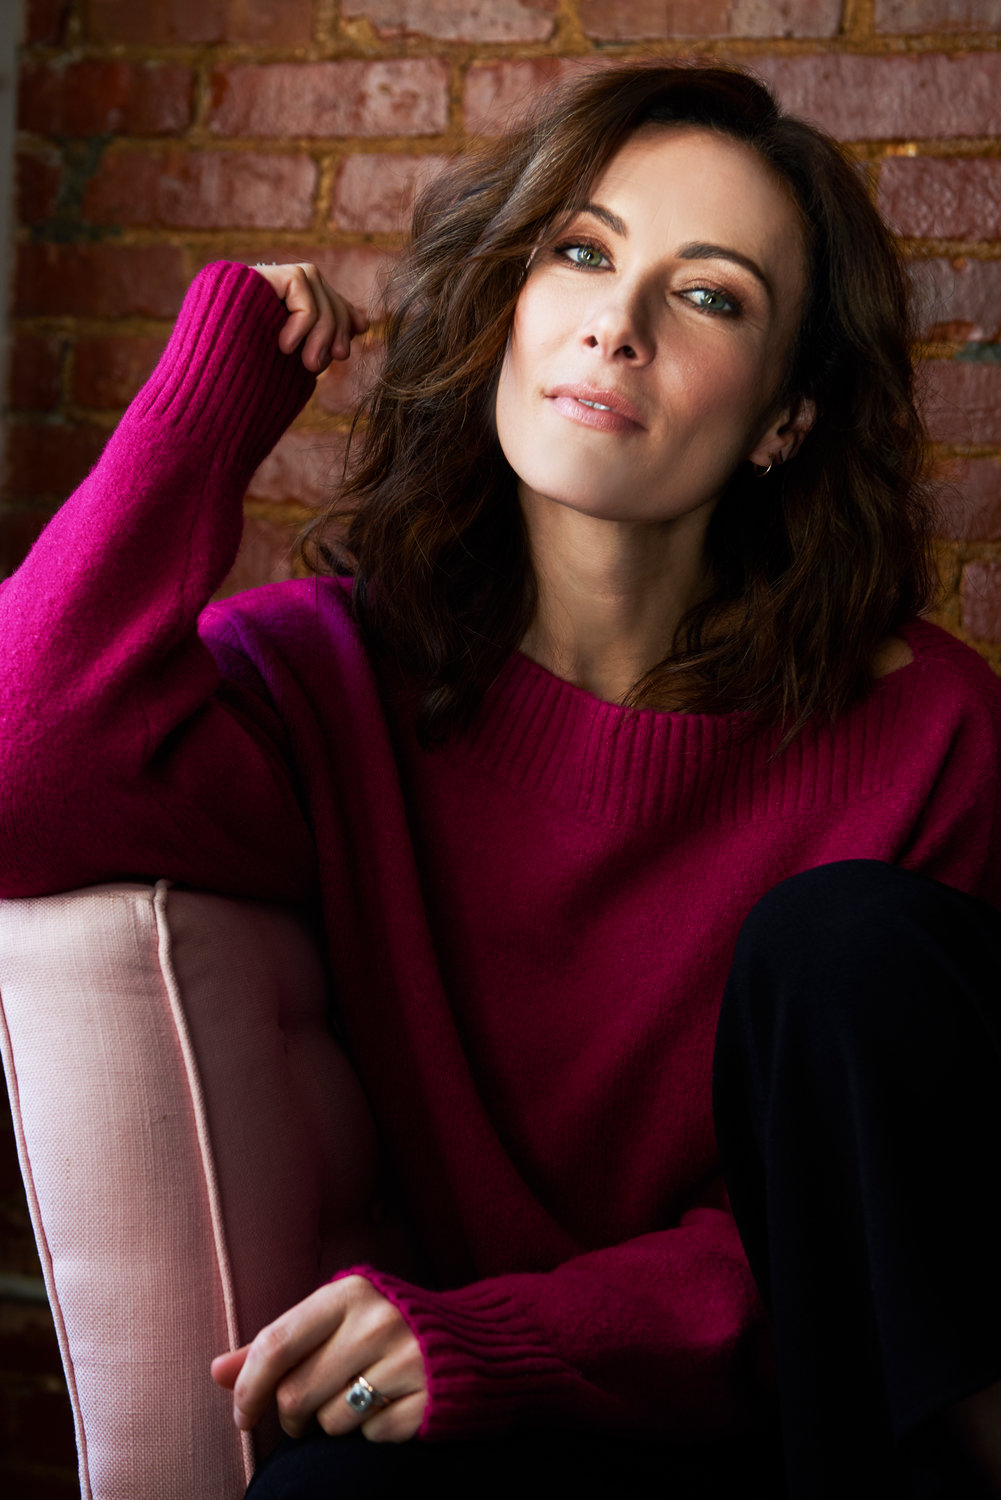 Laura Benanti shares her career highlights in her solo show.